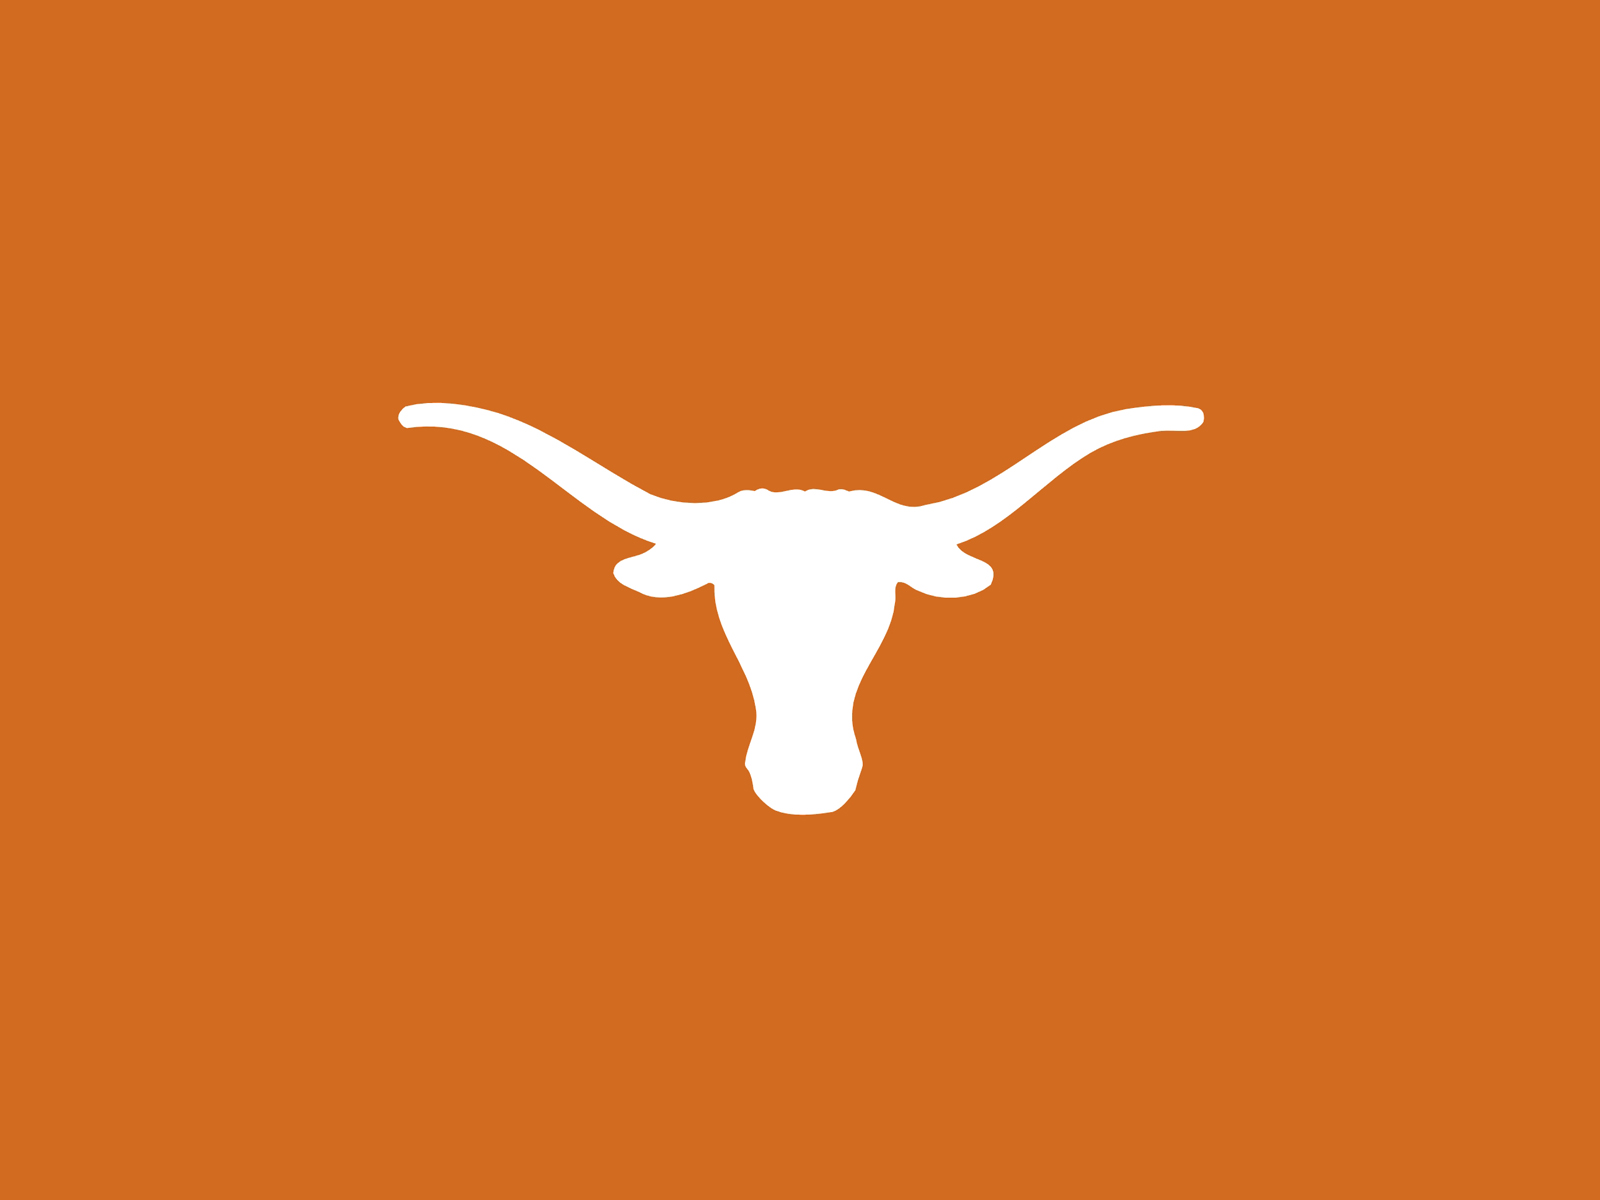 HD wallpapers archived wallpaper 1080p Texas Football Wallpapers 1600x1200